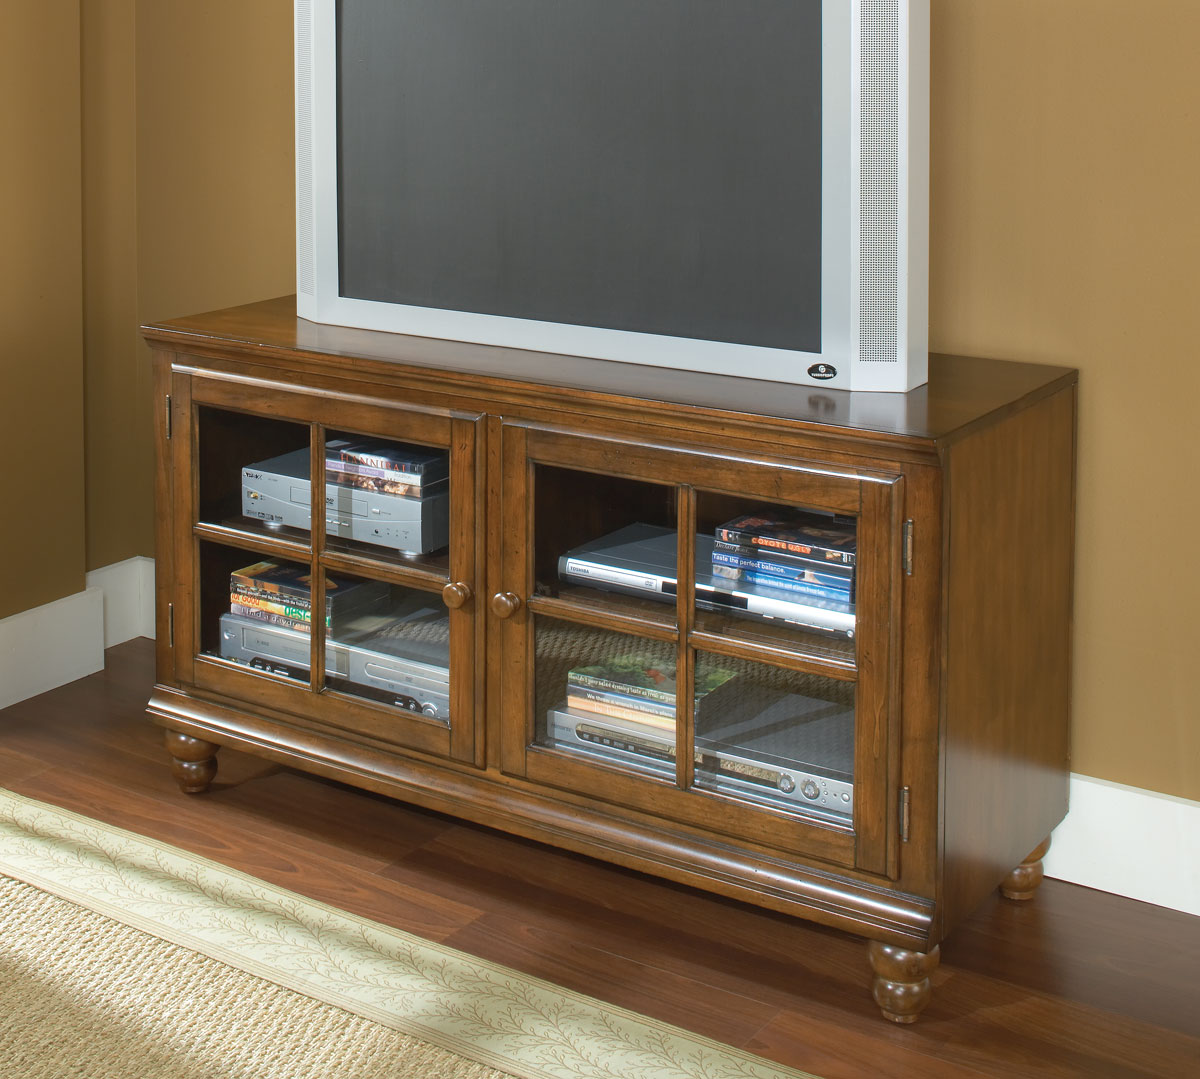 Hillsdale Grand Bay 48in Entertainment Console - Warm Brown